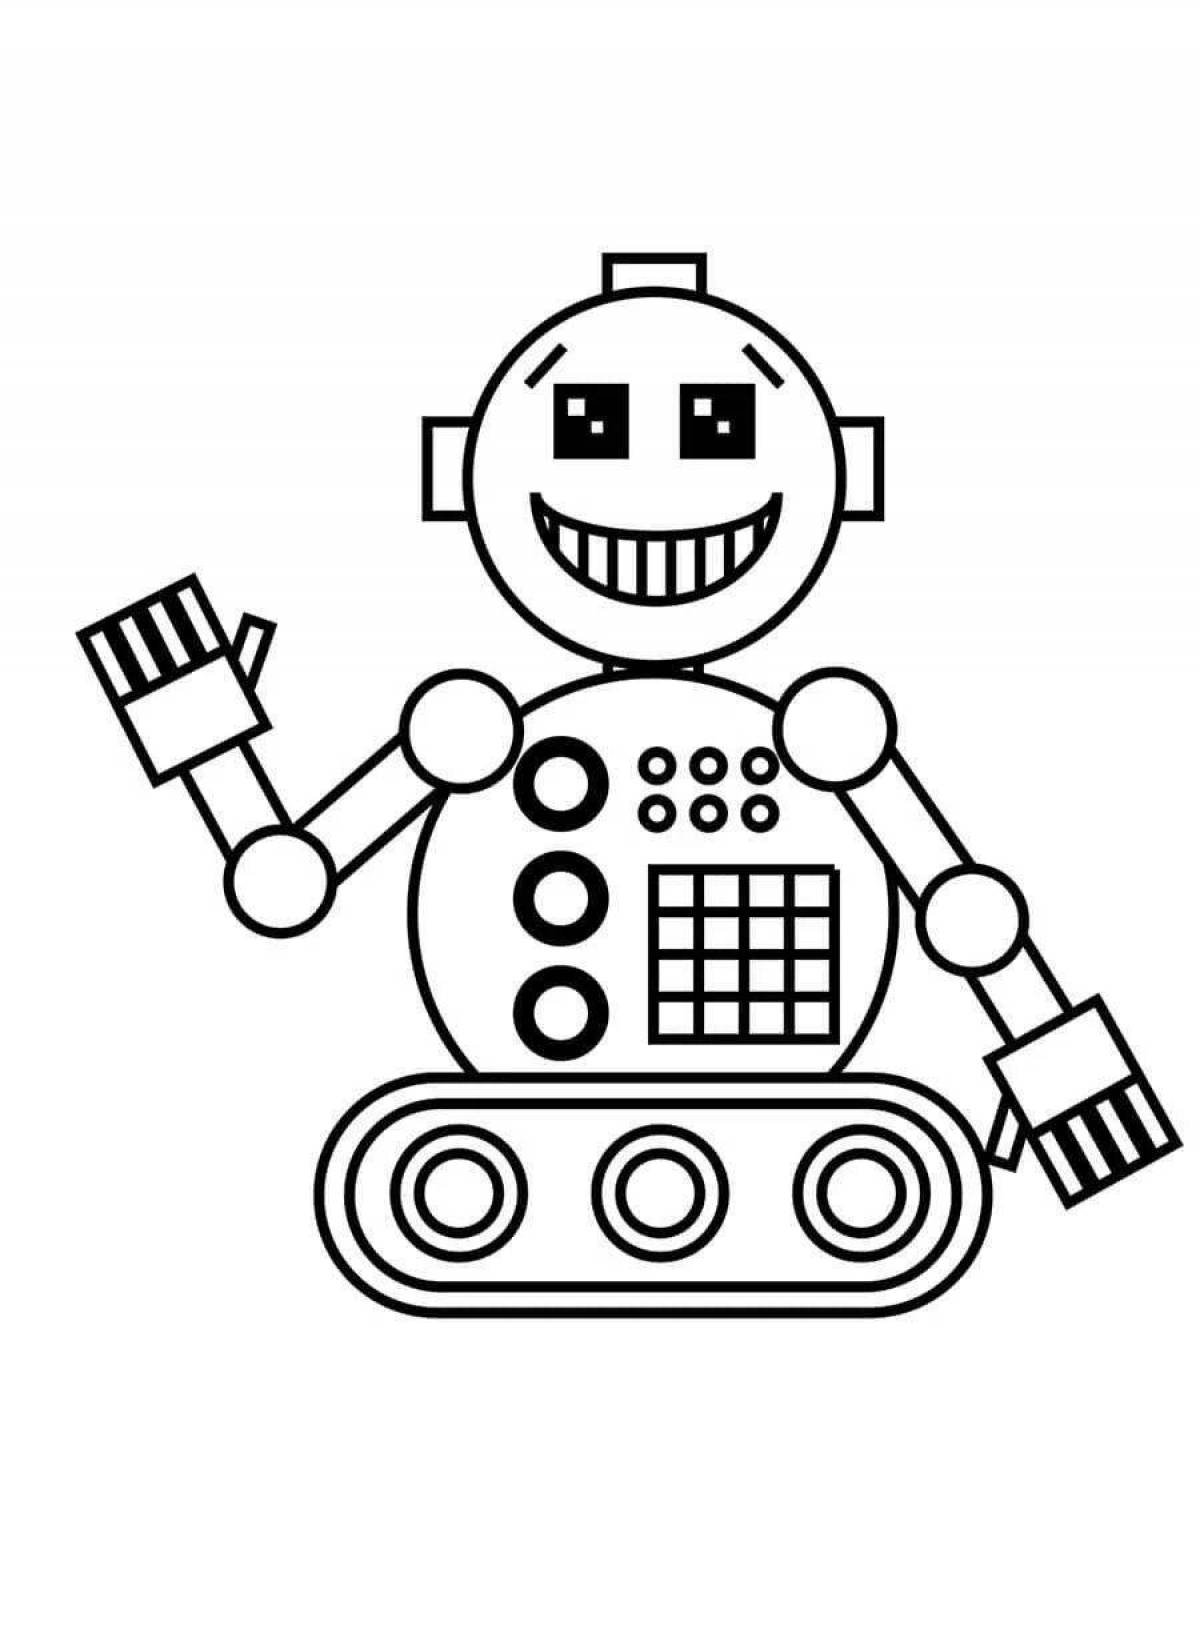 Amazing robot coloring pages for boys